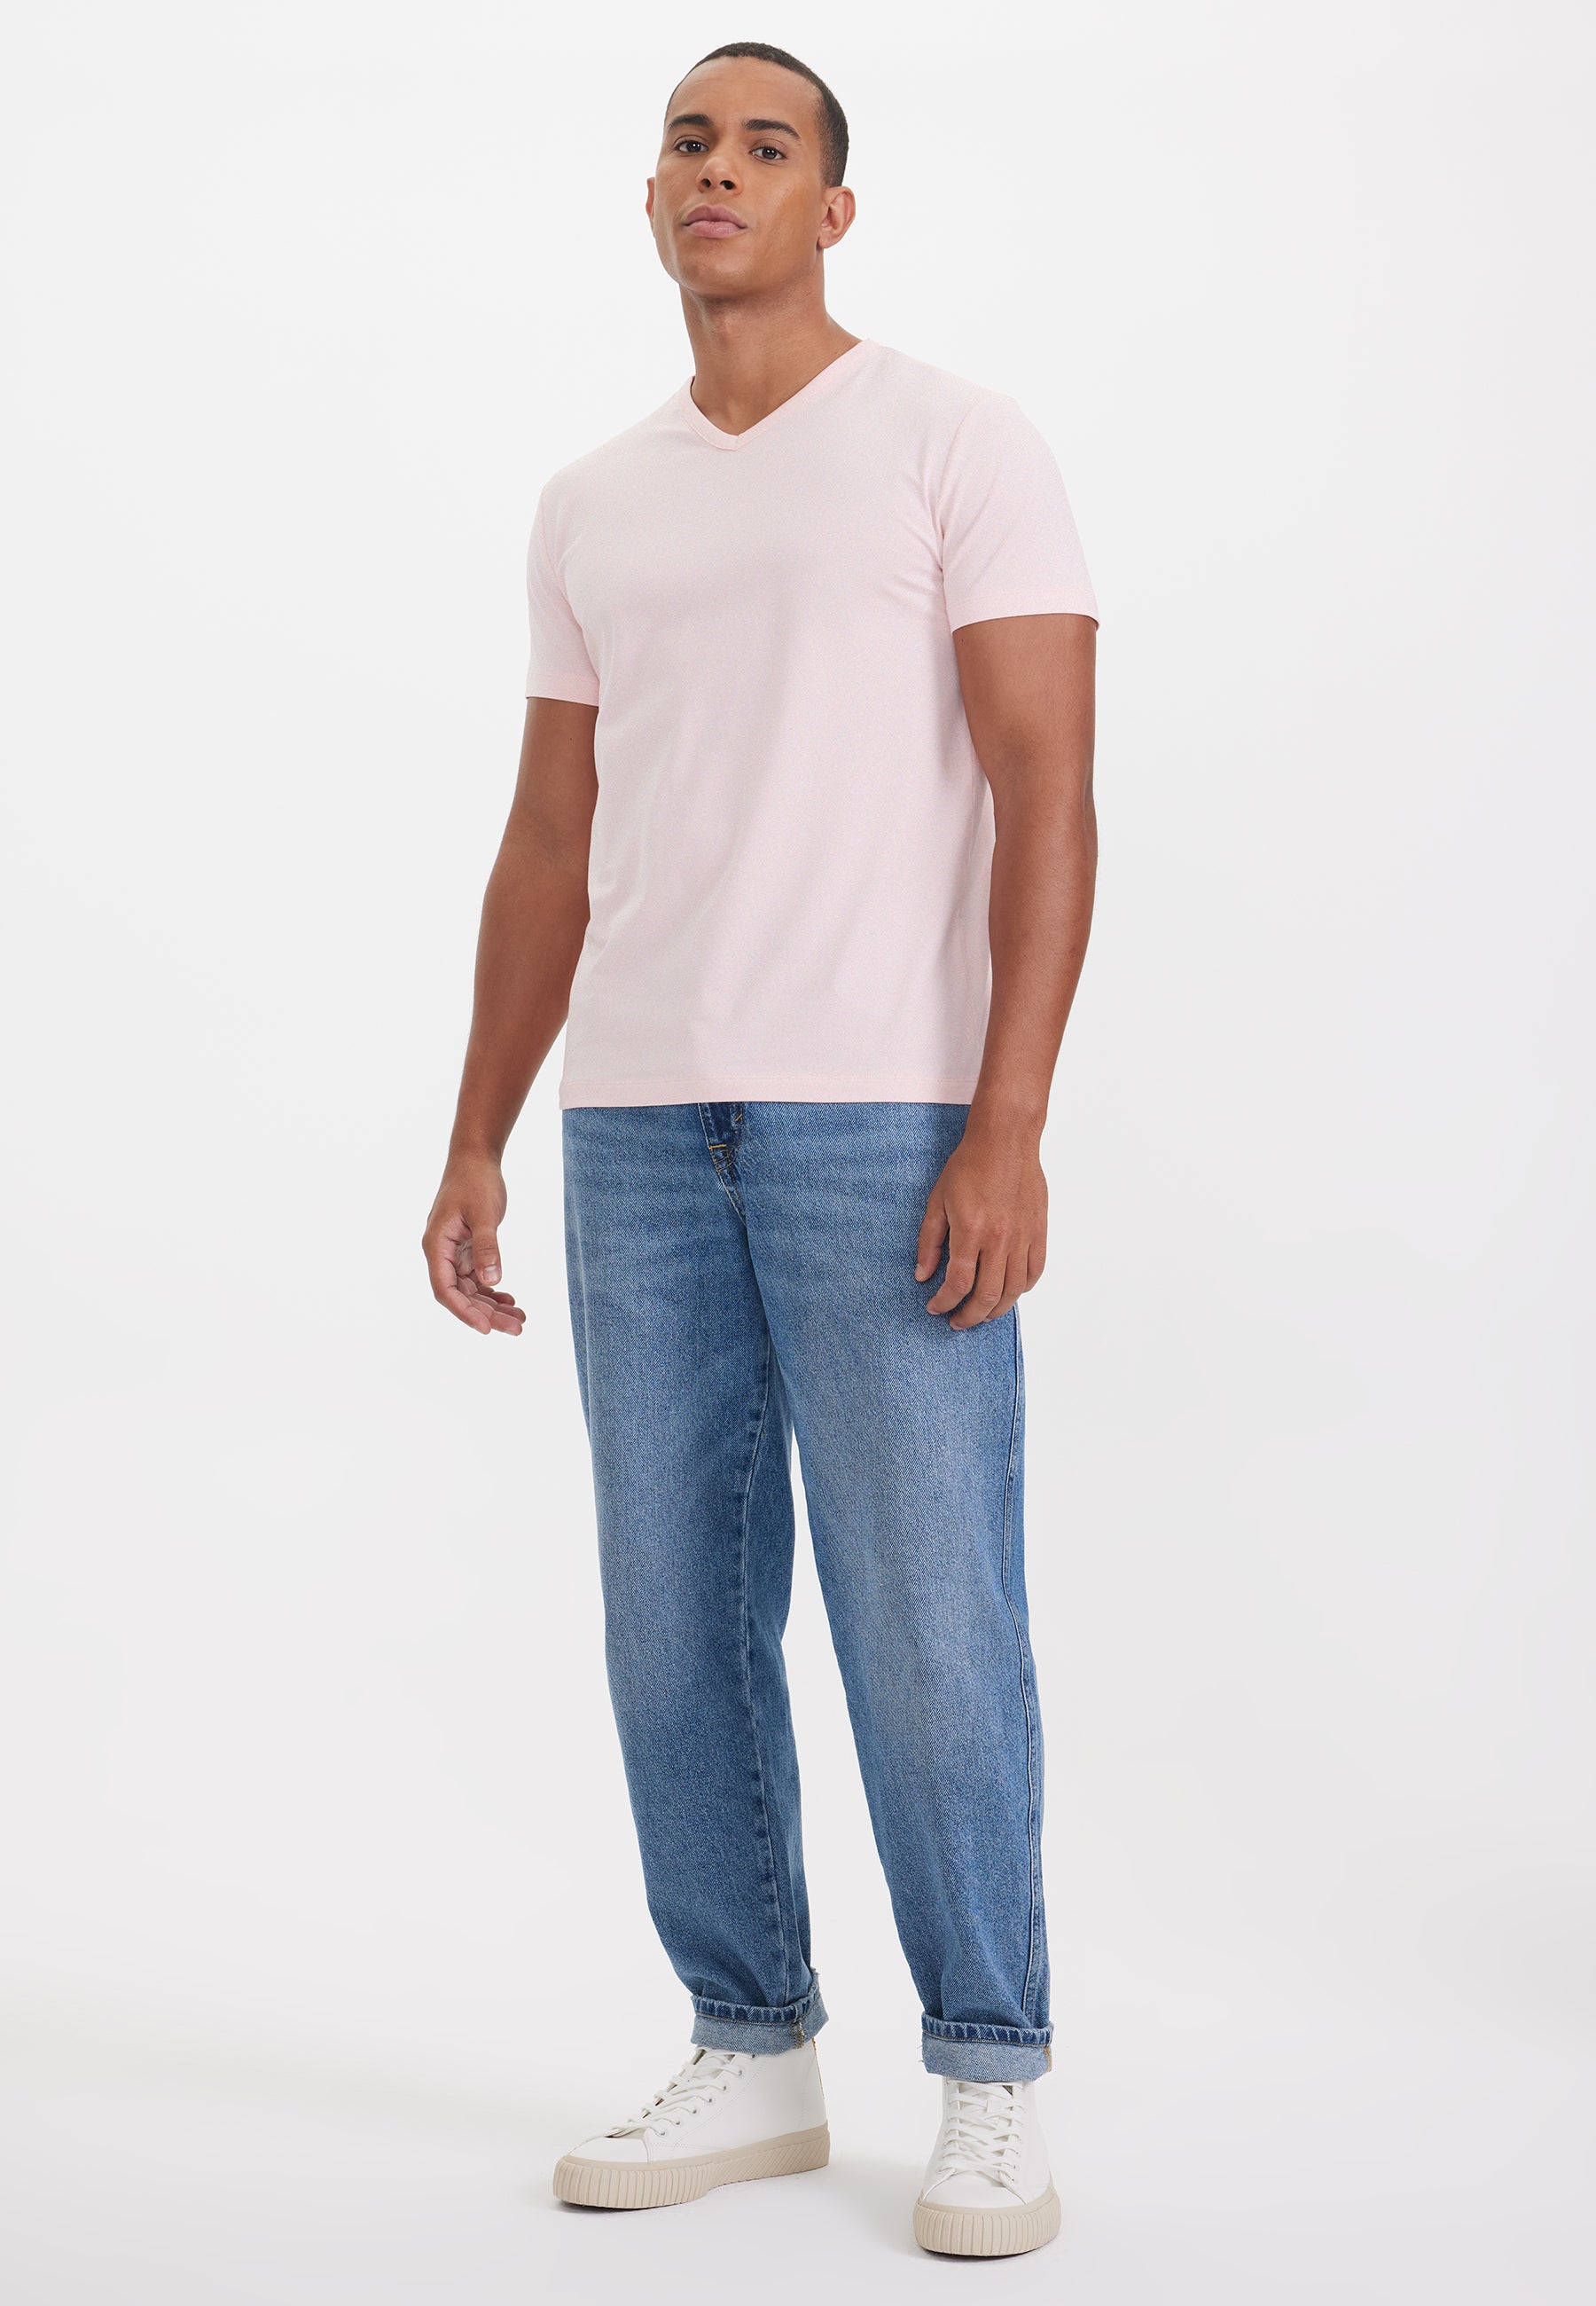 THEO V-NECK TEE in Light Pink